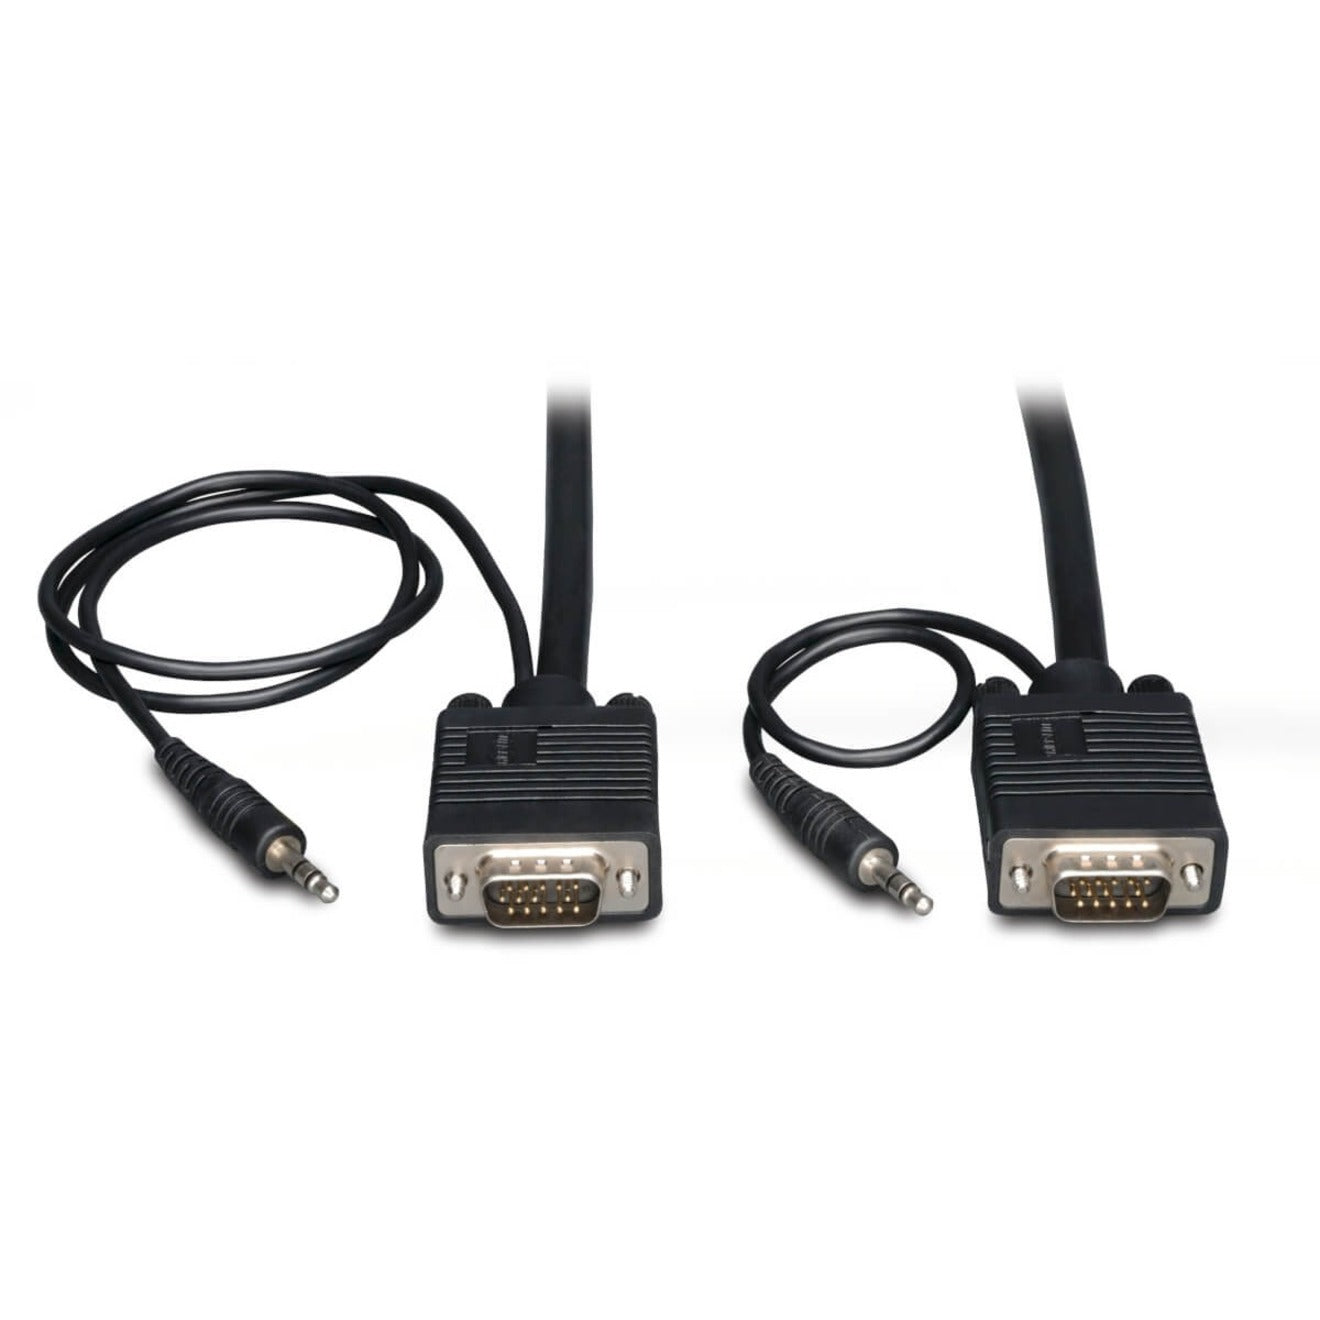 Tripp Lite P504-010 VGA/SVGA & Stereo Audio Cable, 10 ft, Extend Video and Audio Signals